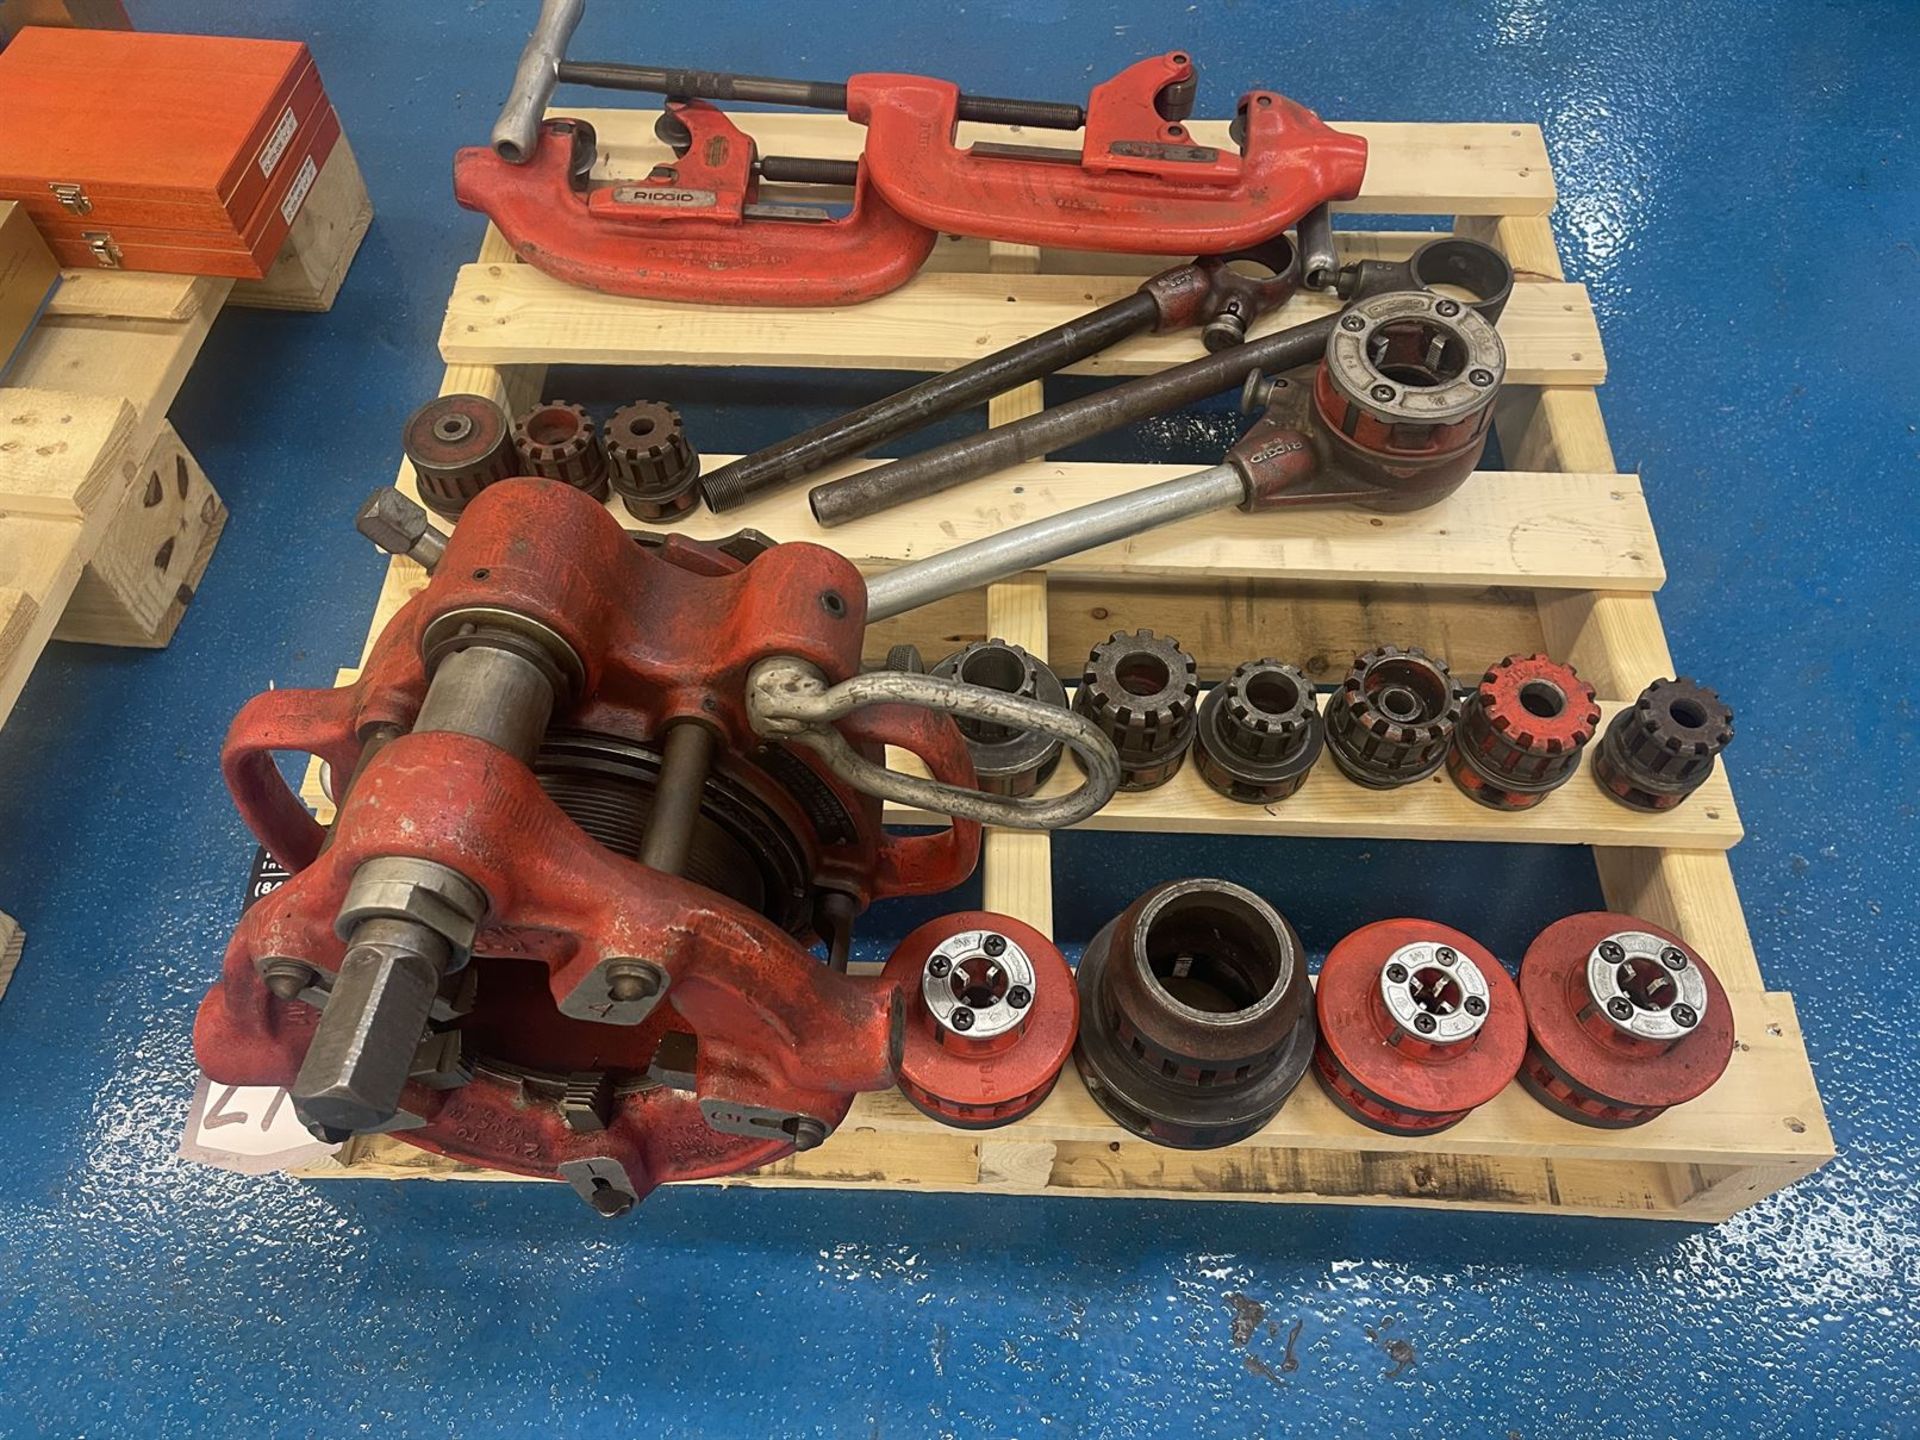 Lot Comprising RIDGID Threading Head, Assorted Dies, and Pipe Cutters